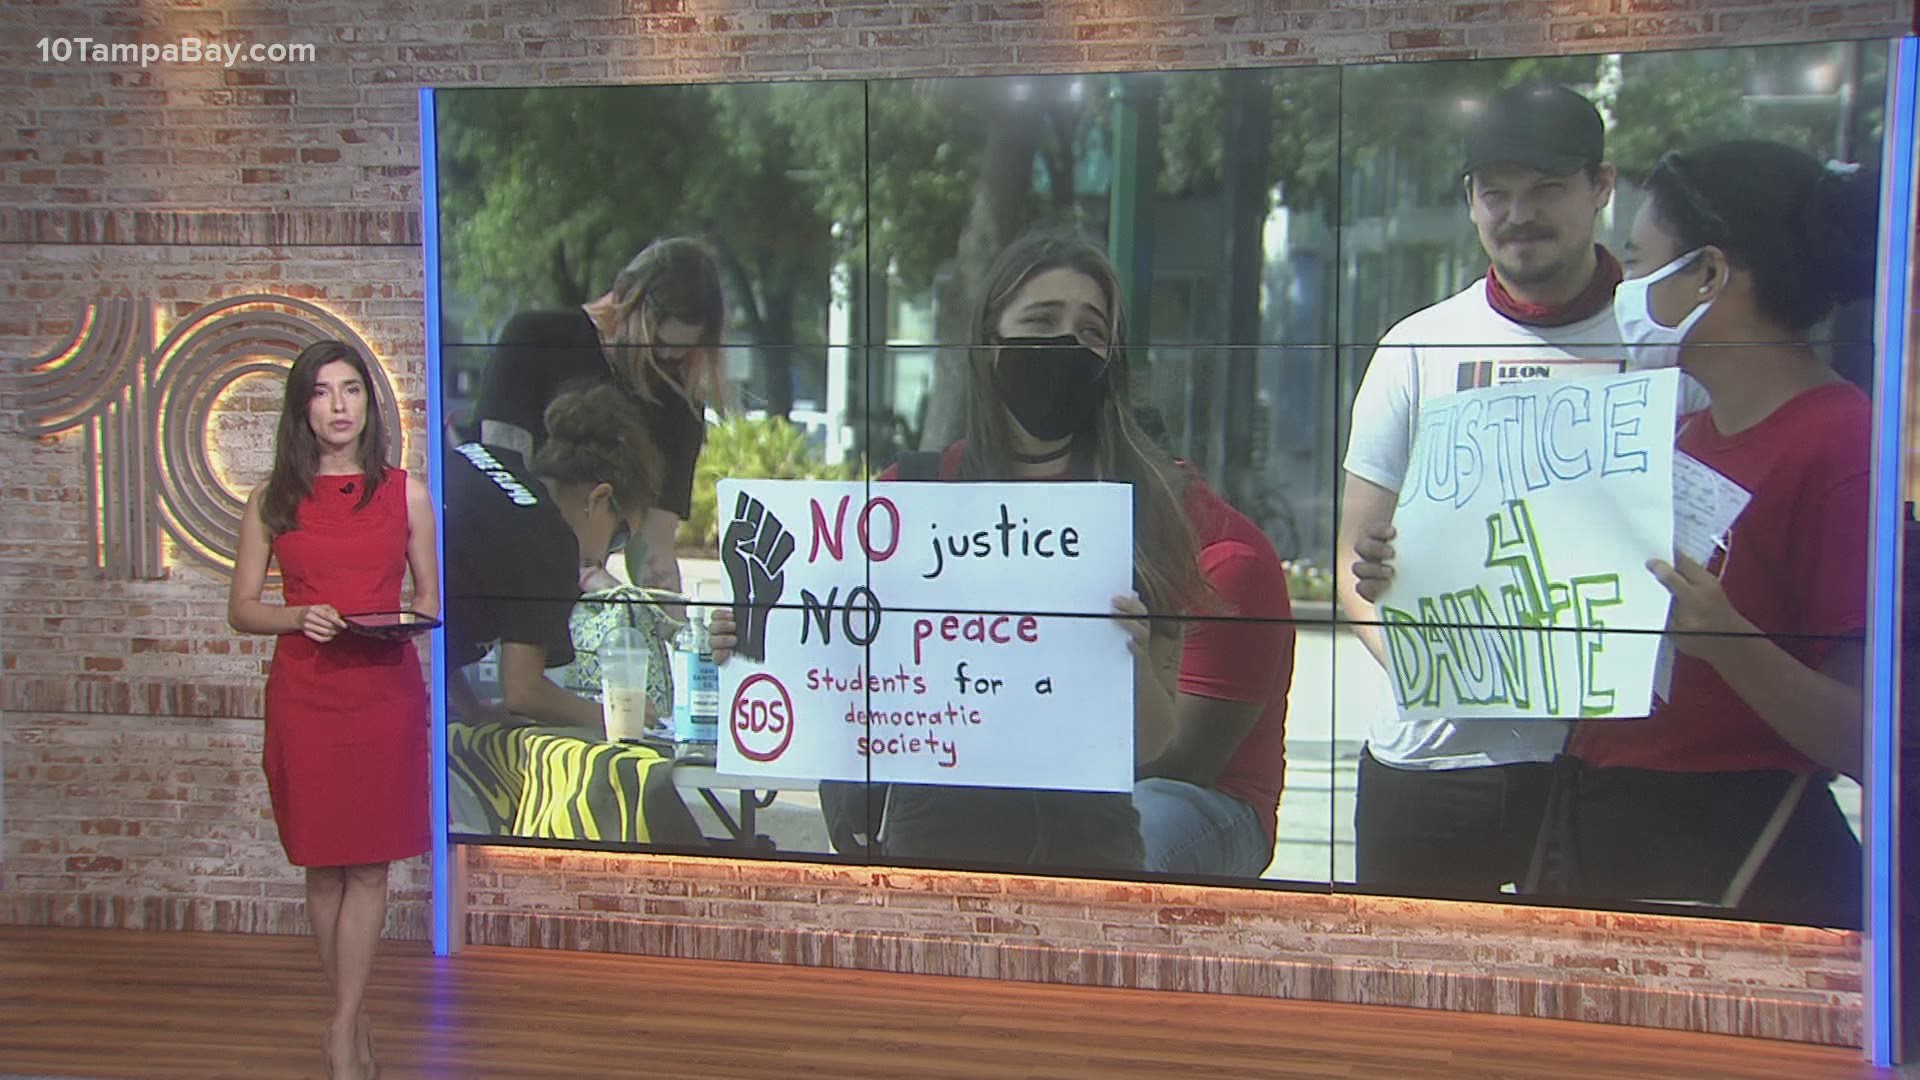 Demonstrators also called for justice for Adam Toledo, who was shot and killed by police in Chicago.